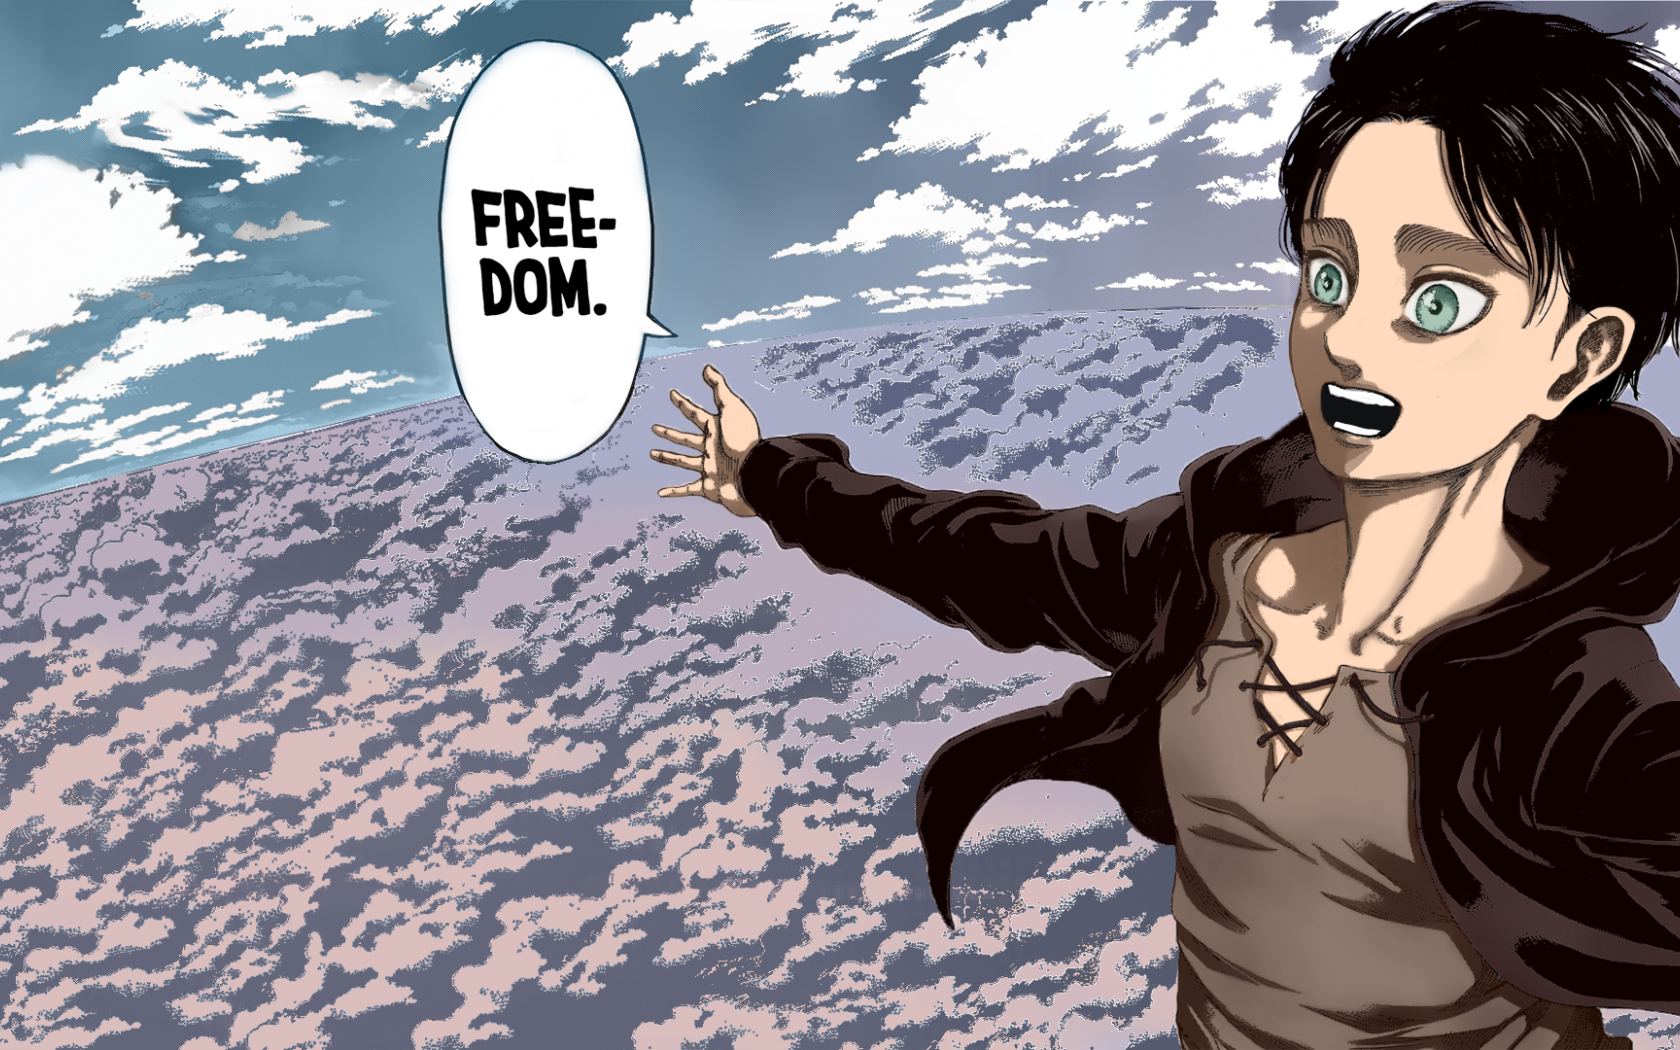 Free download colorized the F R E E D O M panel and formatted it